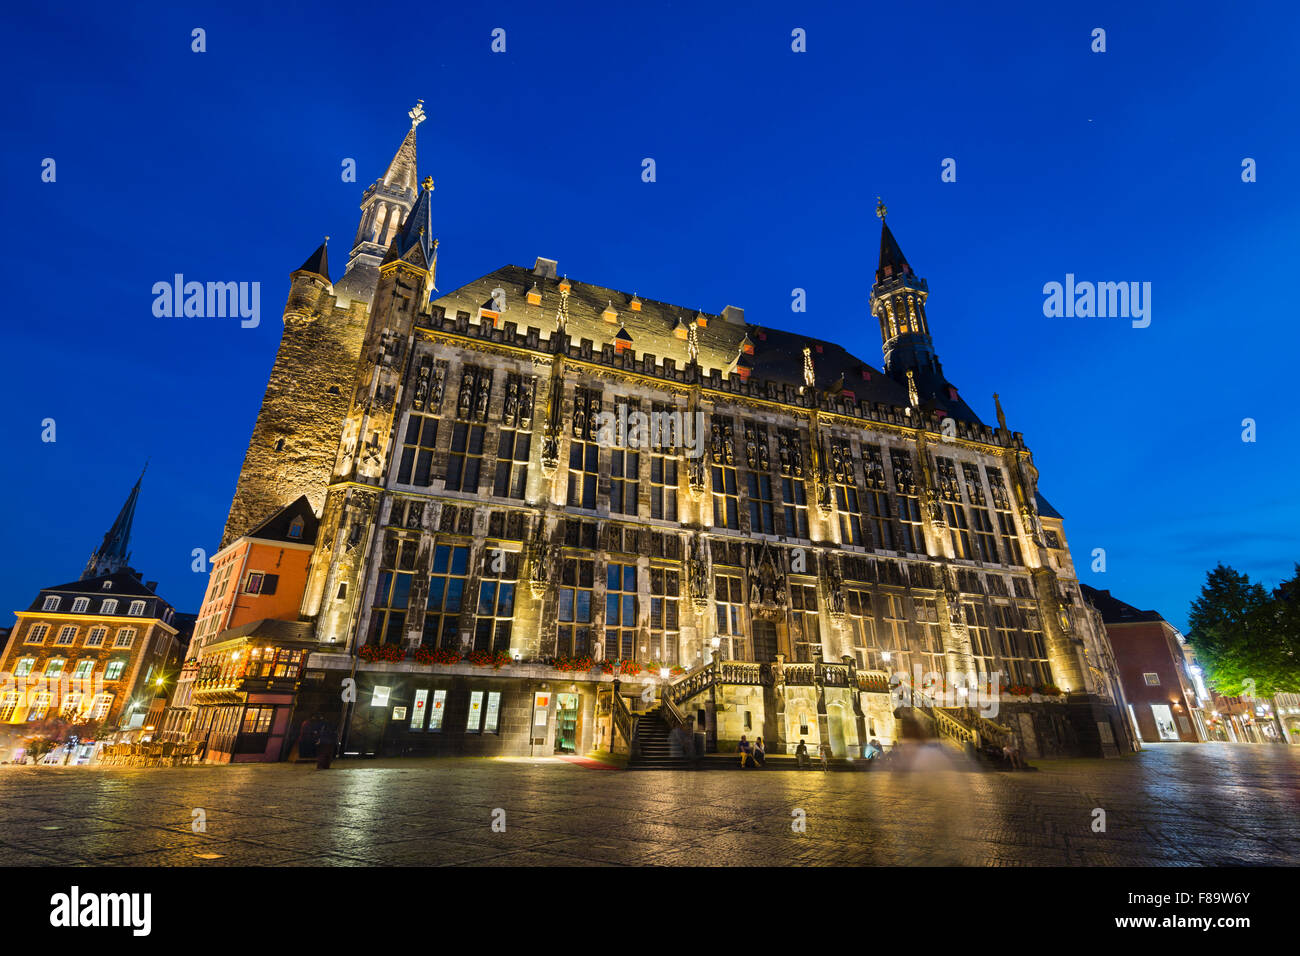 The old town hall of Aachen, Germany with night blue sky. Stock Photo